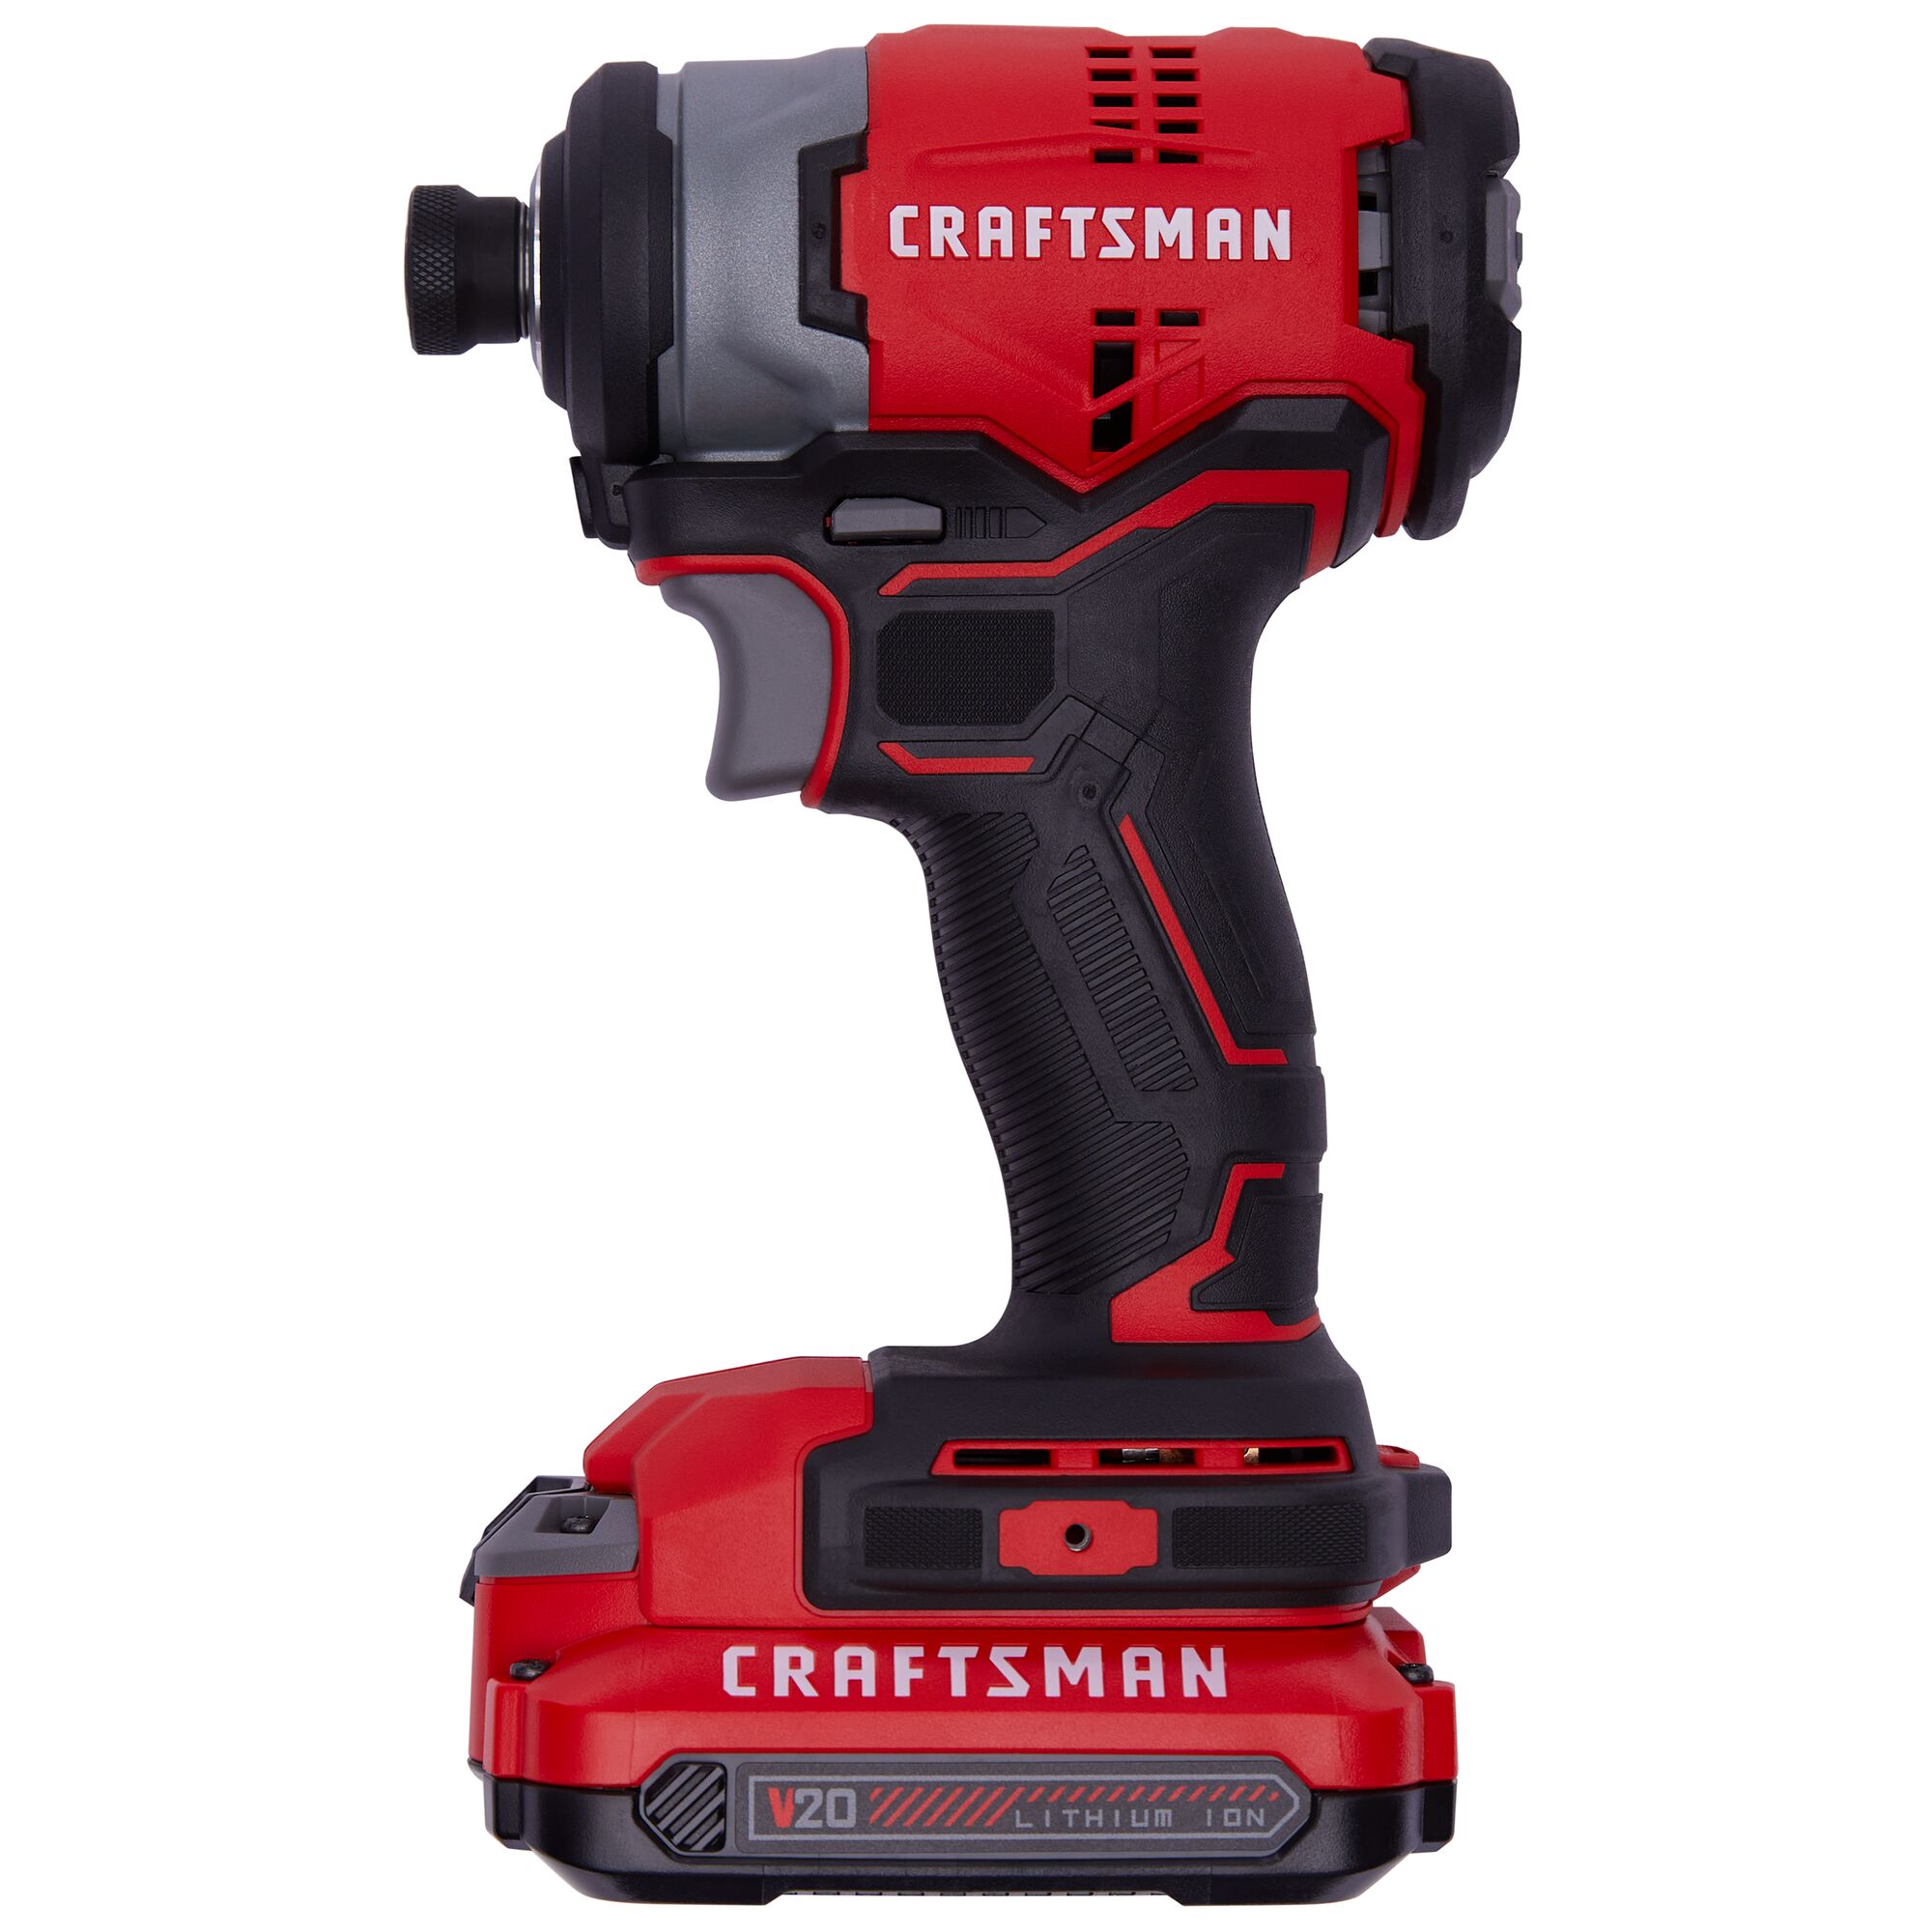 Side view of Craftsman 20V Max ¼ in. Brushless Cordless Impact Driver.